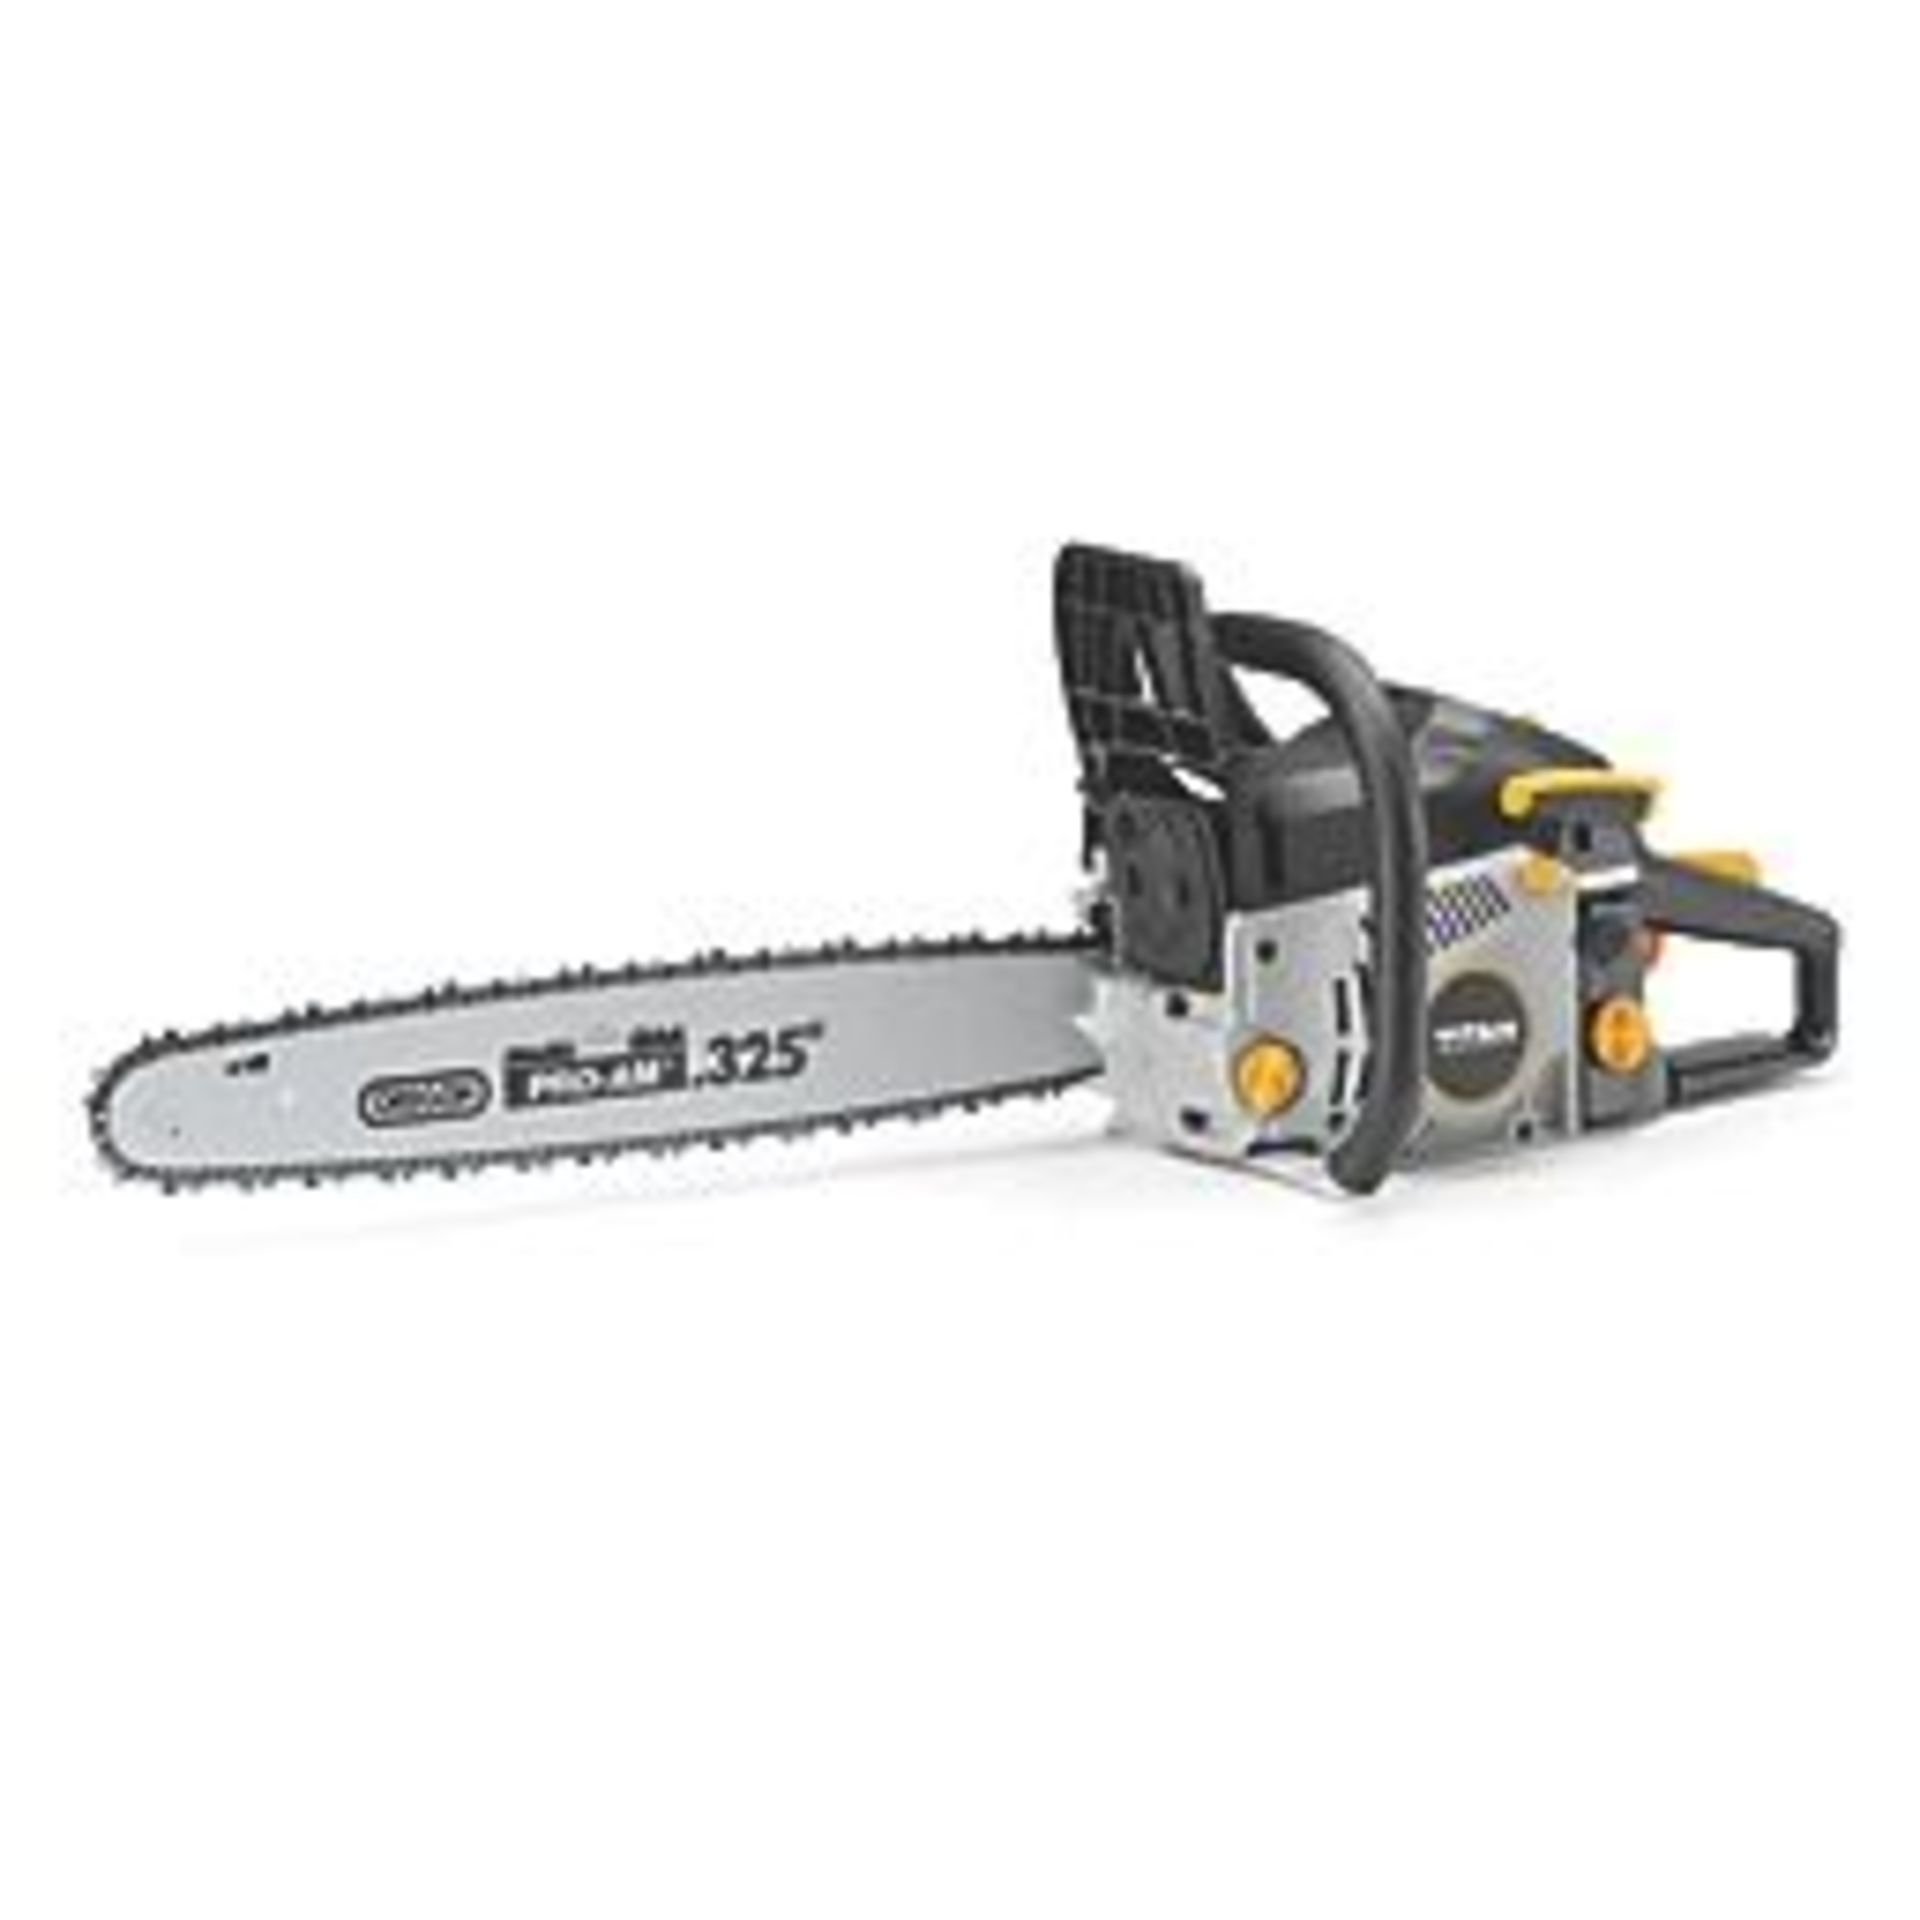 TITAN TTCSP49 50CM 49.3CC CHAINSAW. - P2. Powerful chainsaw with Easy-Start technology, reducing the